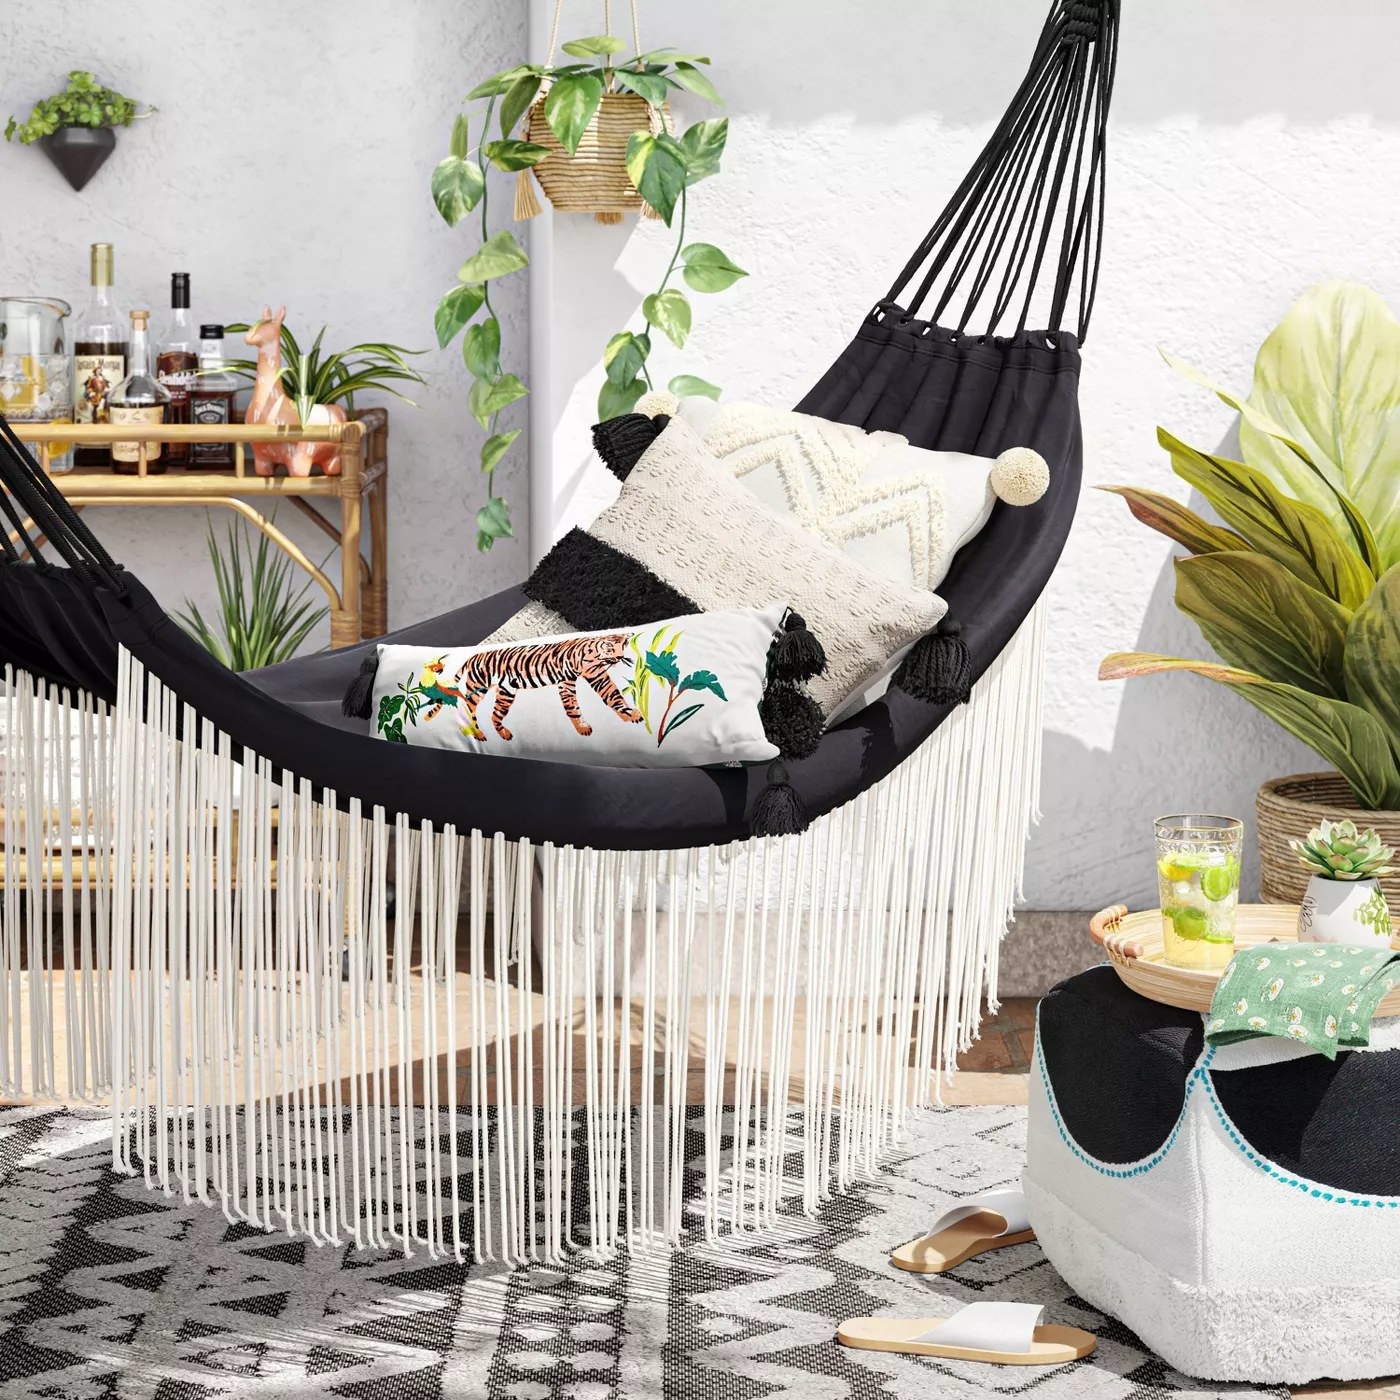 The black hammock with white fringe on either side in a backyard